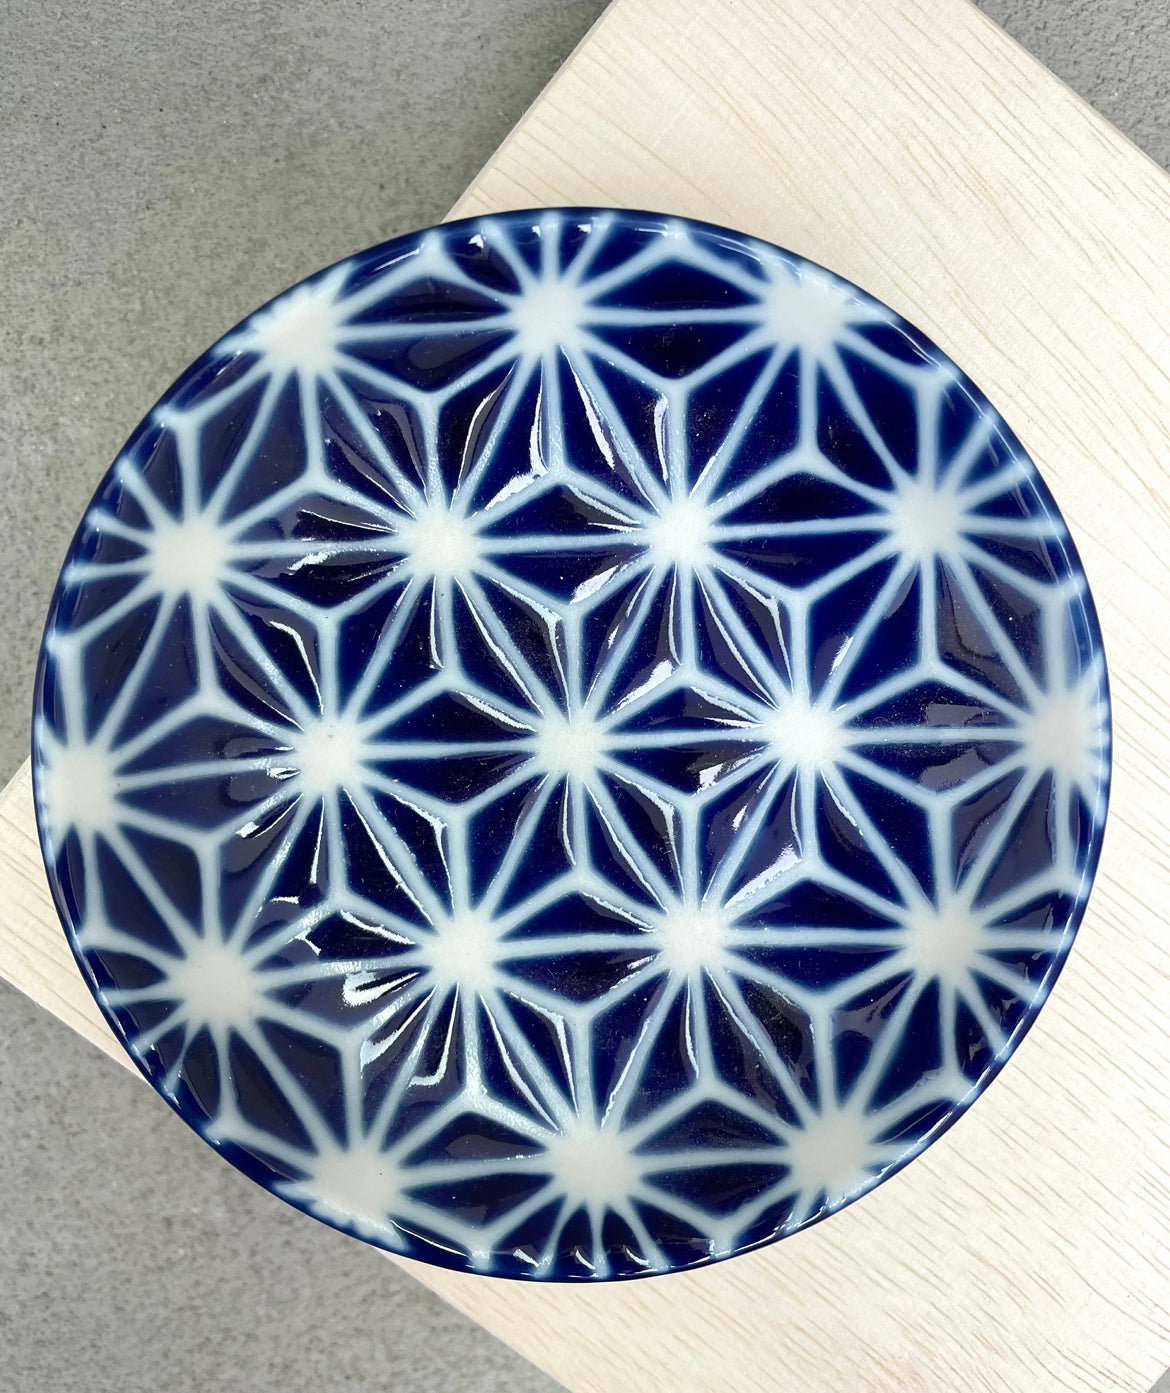 Soy bowl with blue pattern